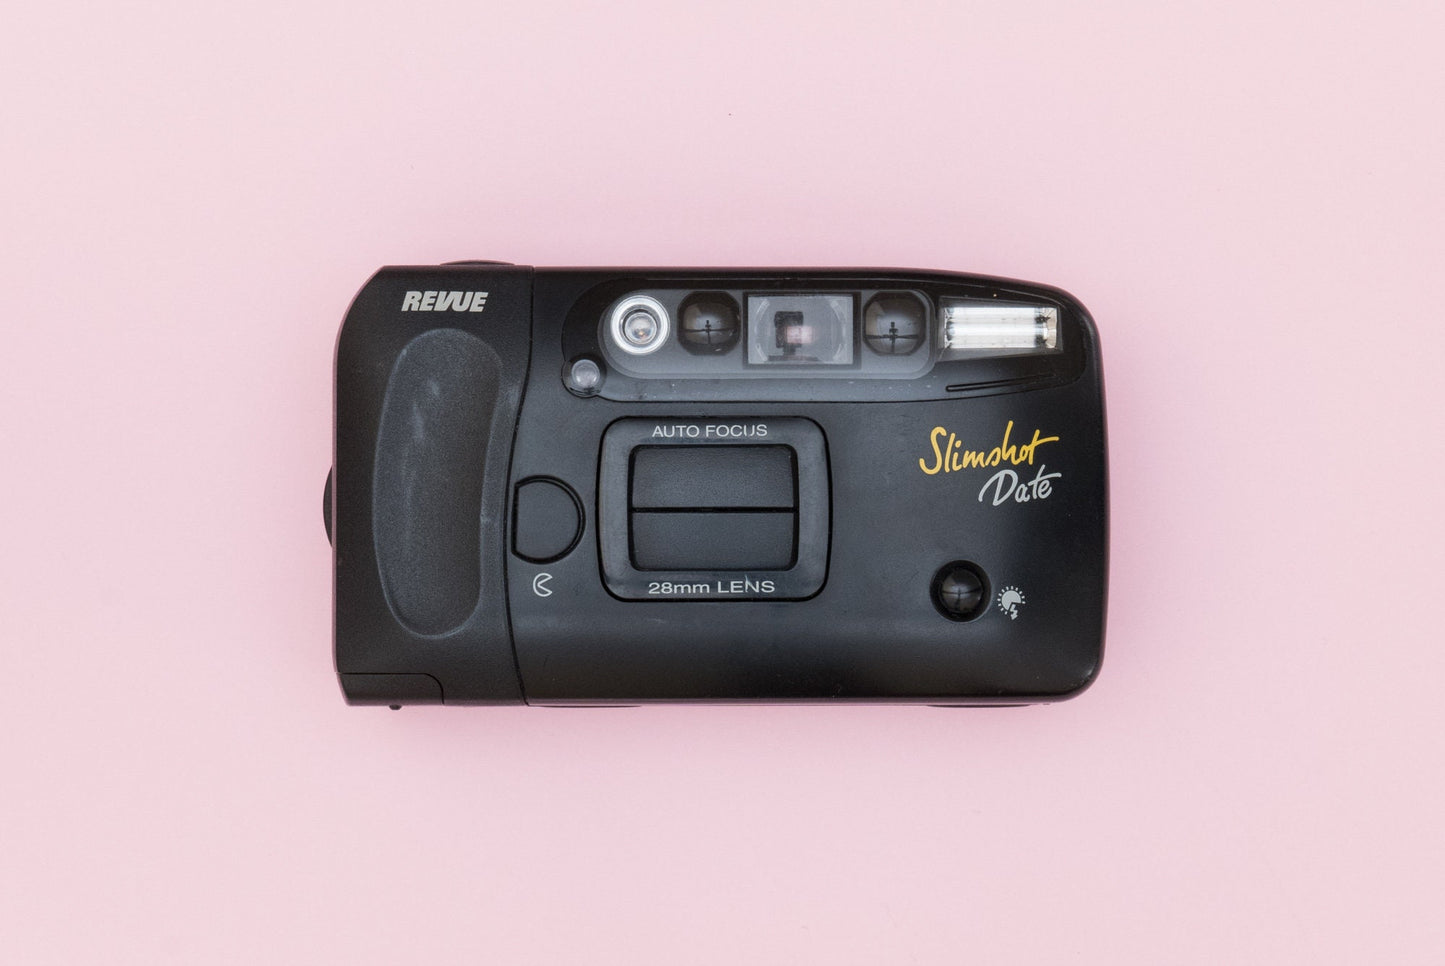 Revue Slimshot Date Compact Point and Shoot 35mm Film Camera